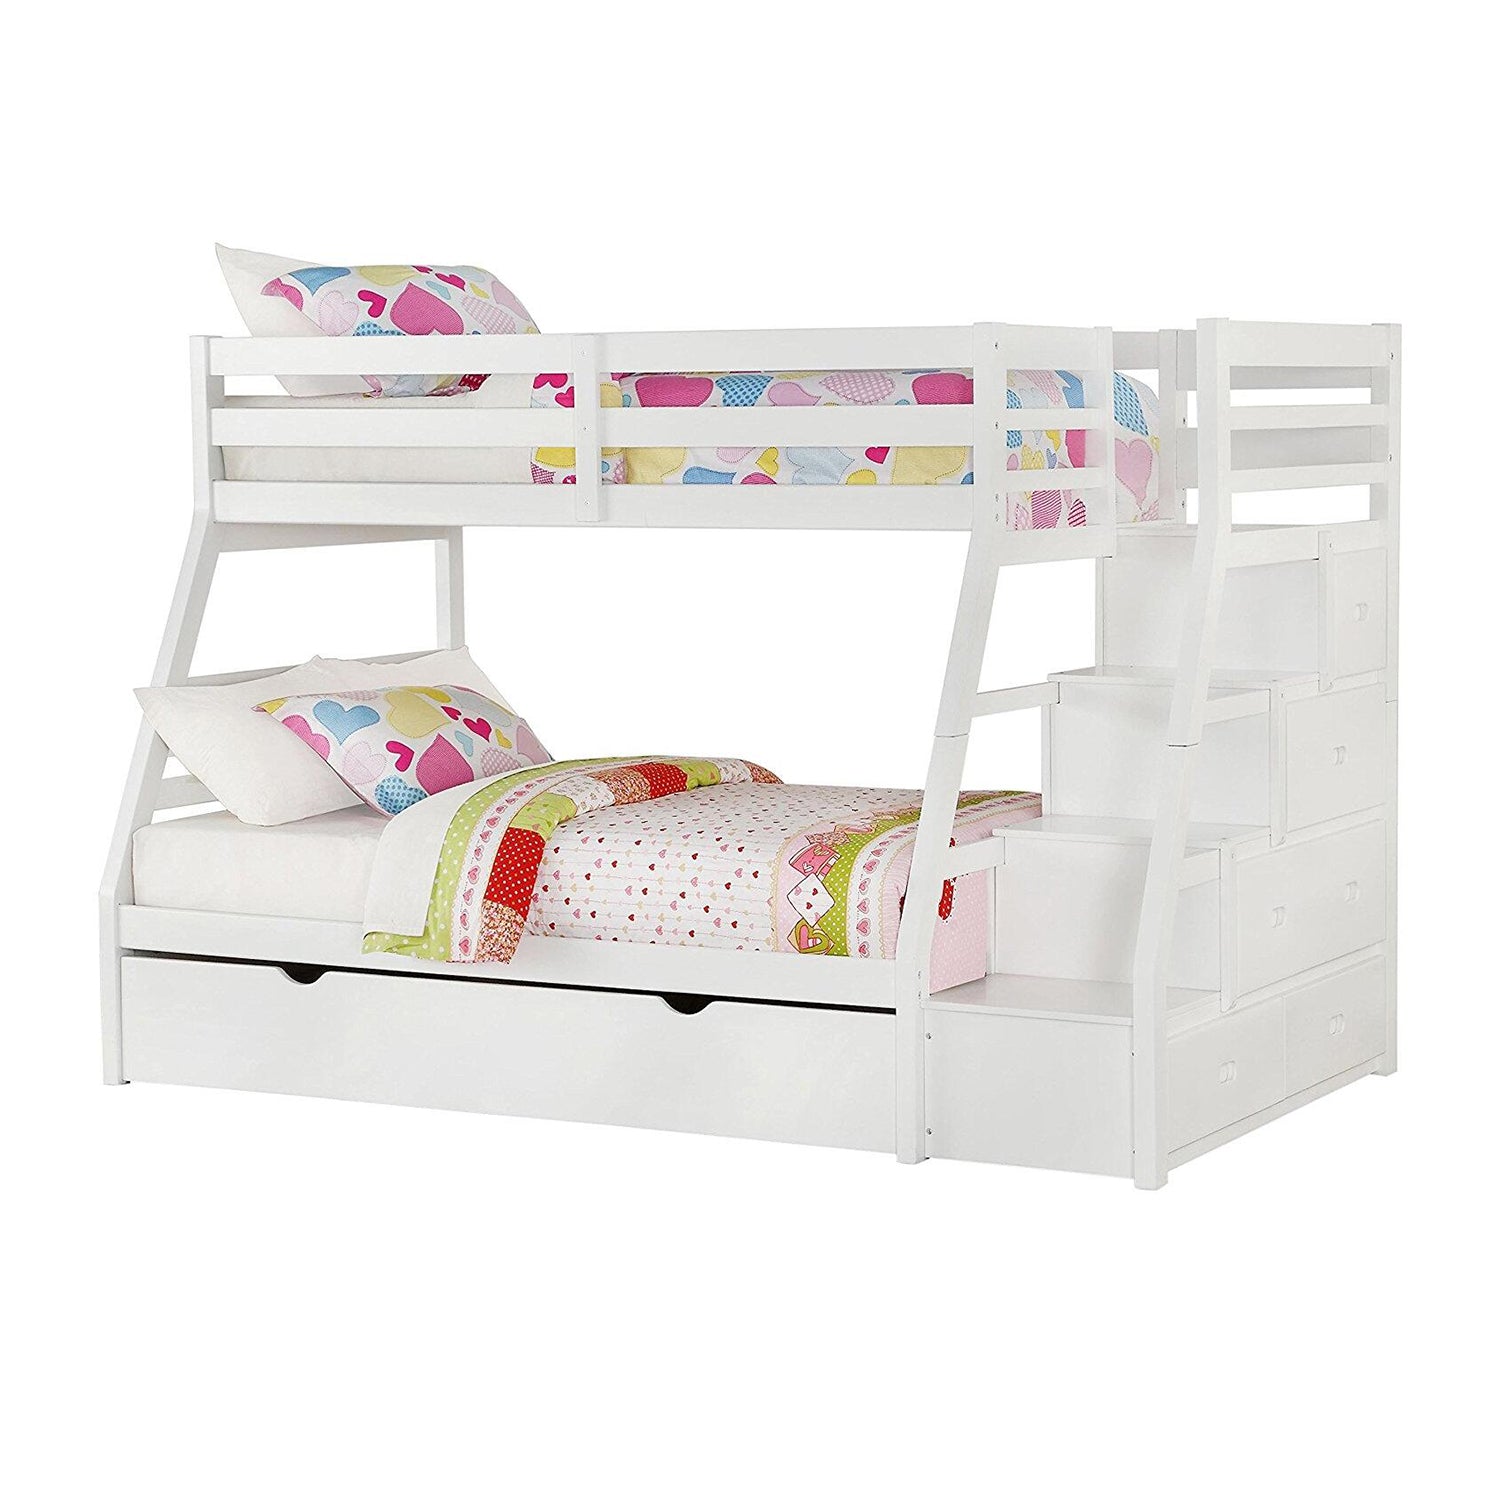 95" X 56" X 65" Twin Over Full White Storage Ladder And Trundle Bunk Bed